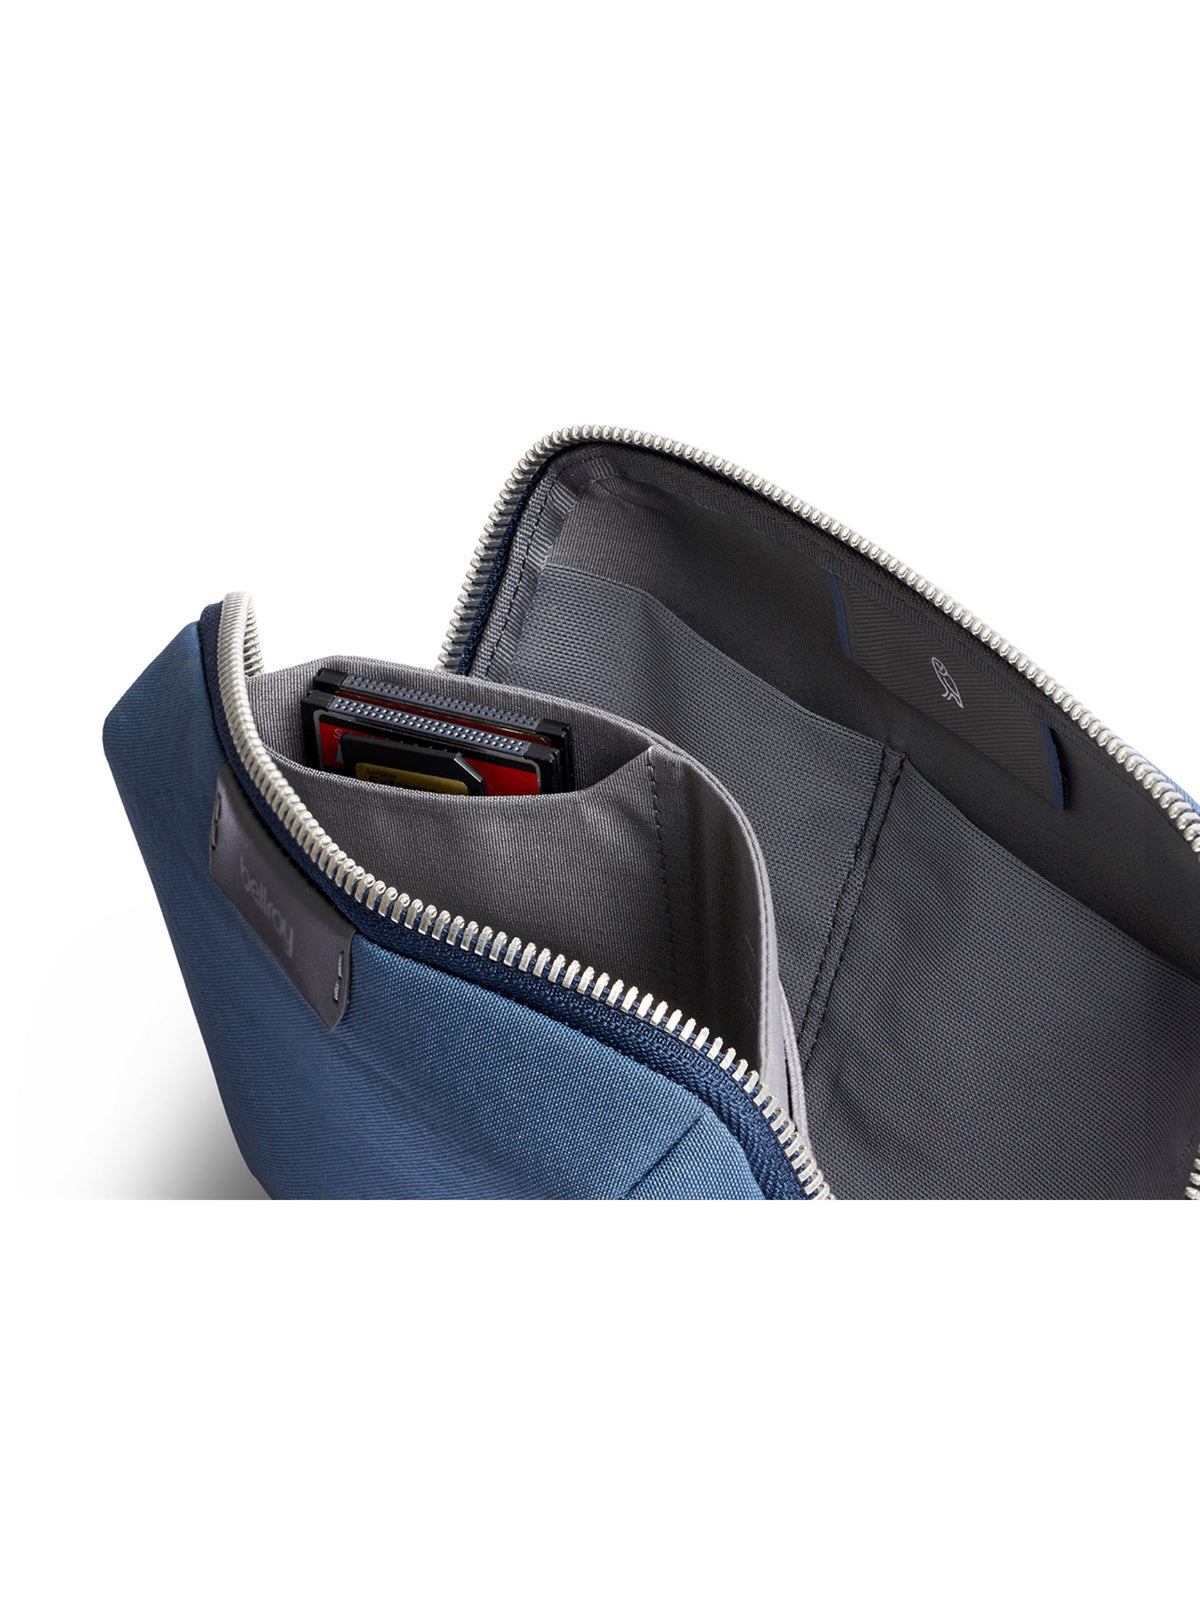 Bellroy Tech Kit Compact Marine Blue Recycled